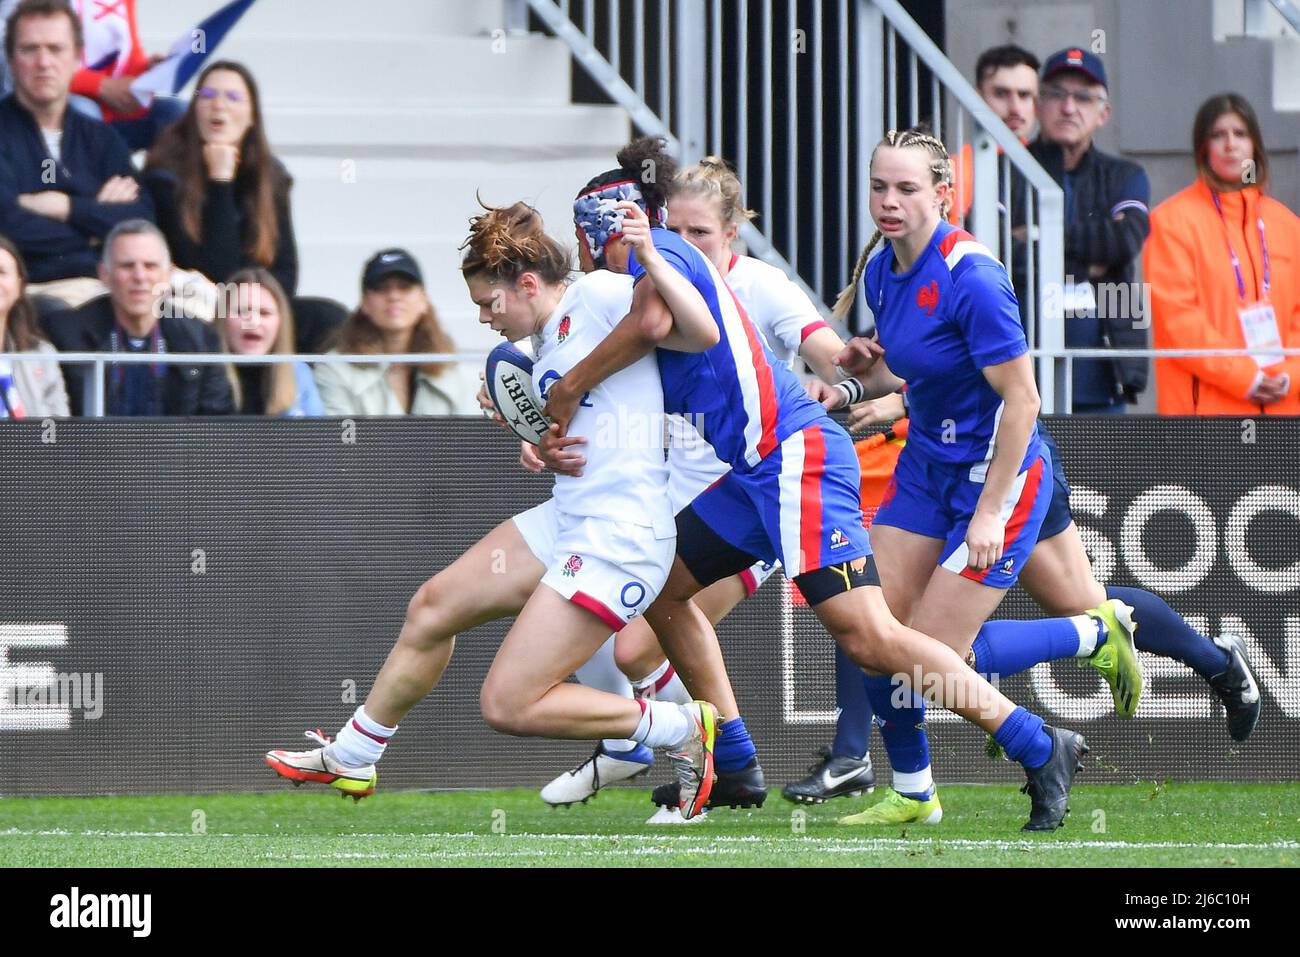 England's Lydia Thompson is tackled during the TikTok Women's Six Nations match at the Stade Jean Dauger in Beyonne, France. Picture date: Saturday April 30, 2022. Stock Photo